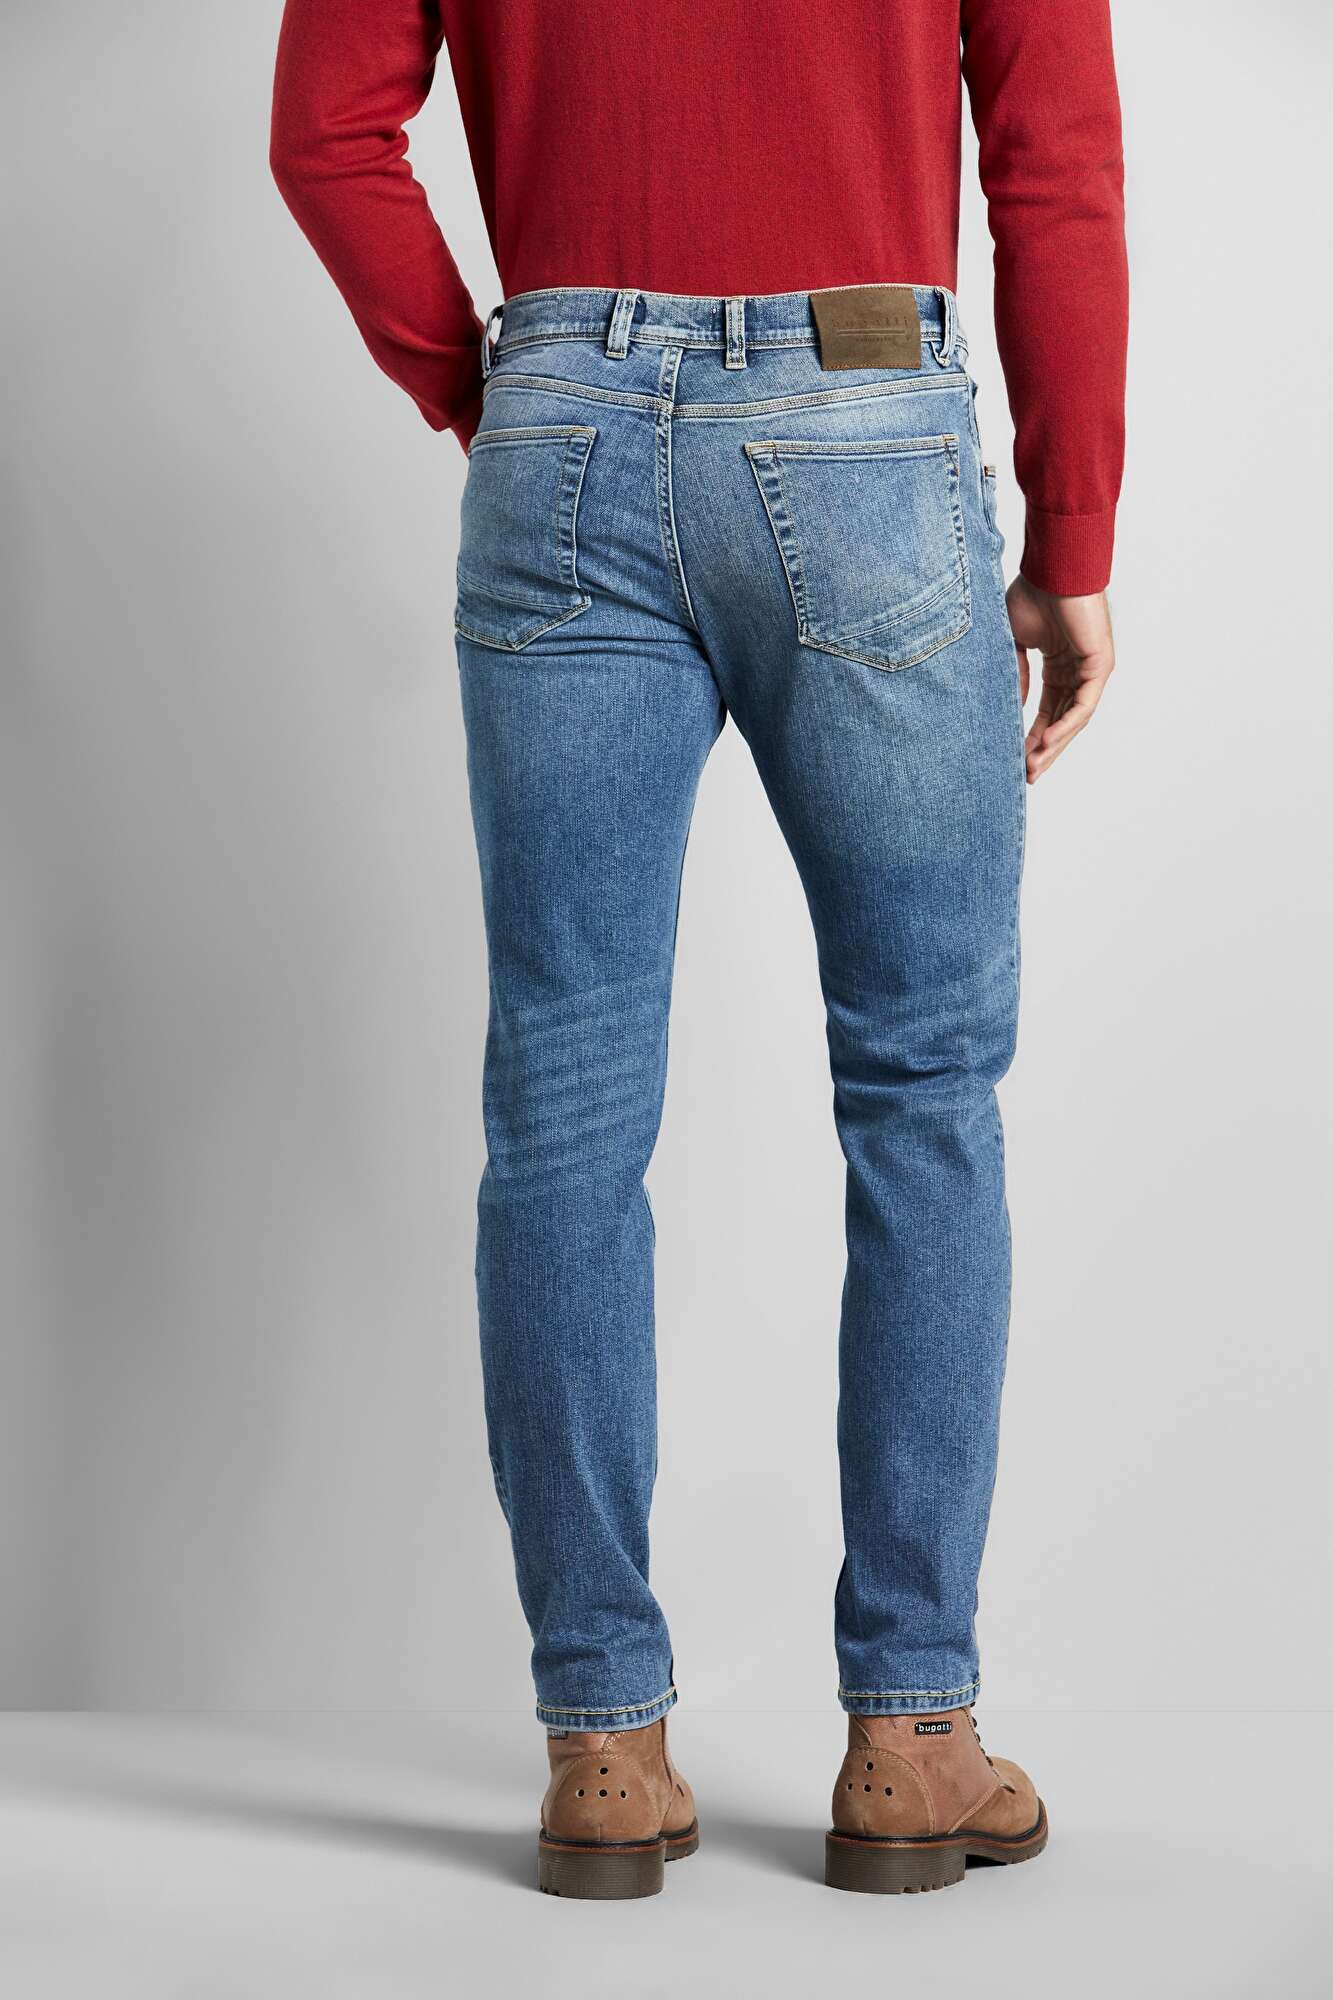 5-pocket jeans In a bugatti blue look used in wash 